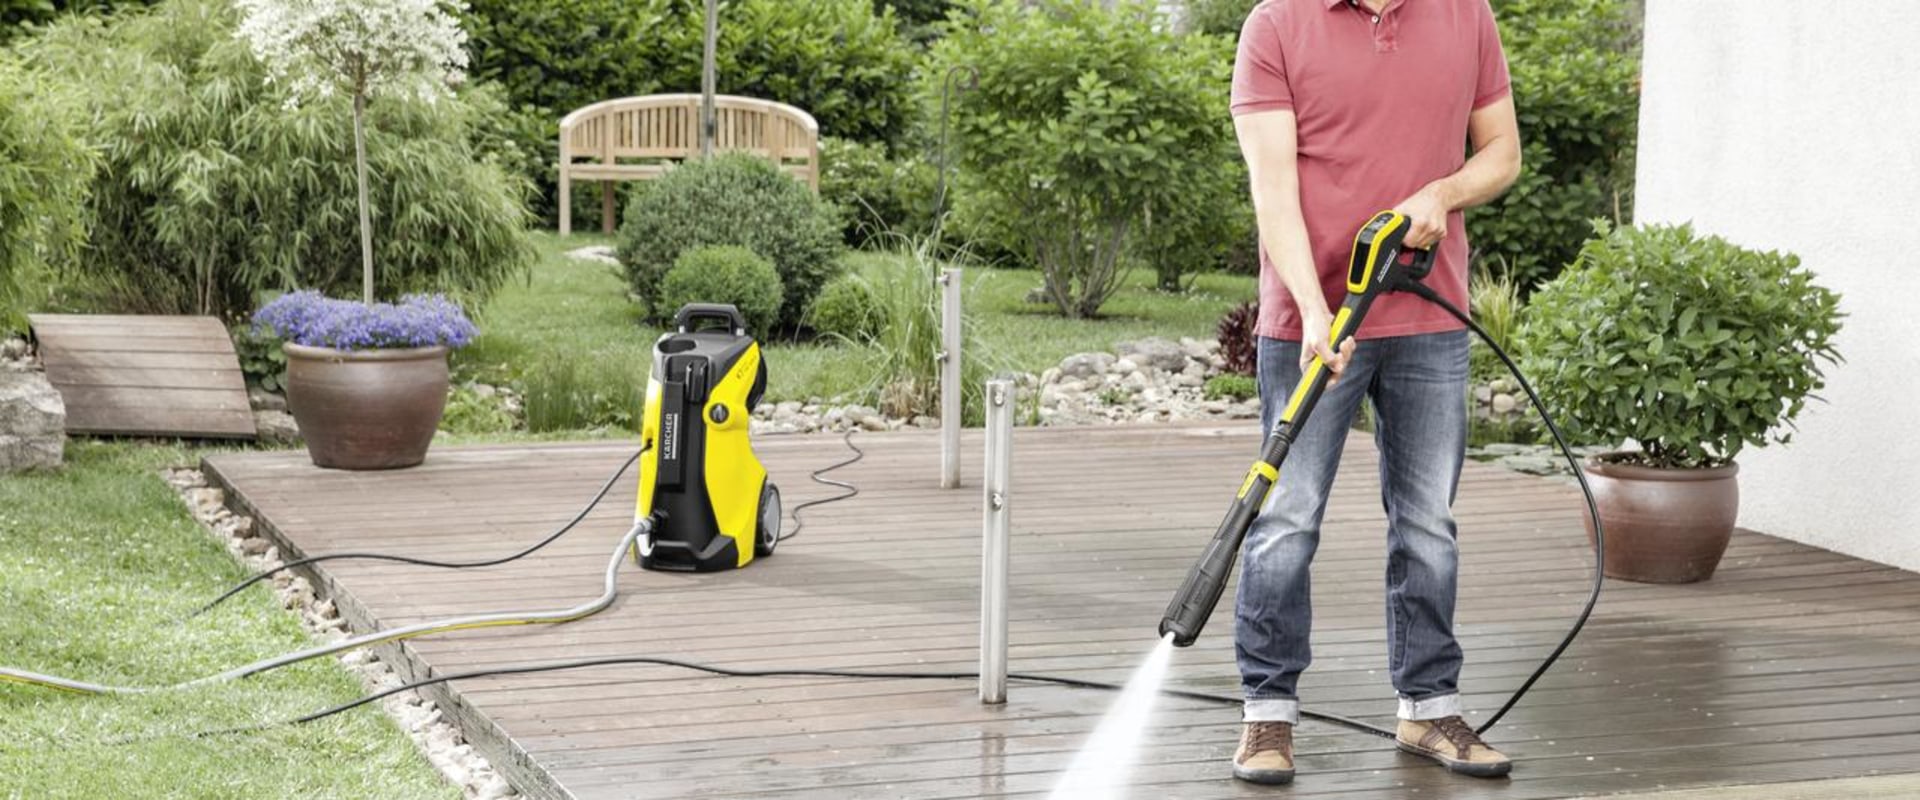 Pressure Washing Safety: What Protective Gear is Needed?